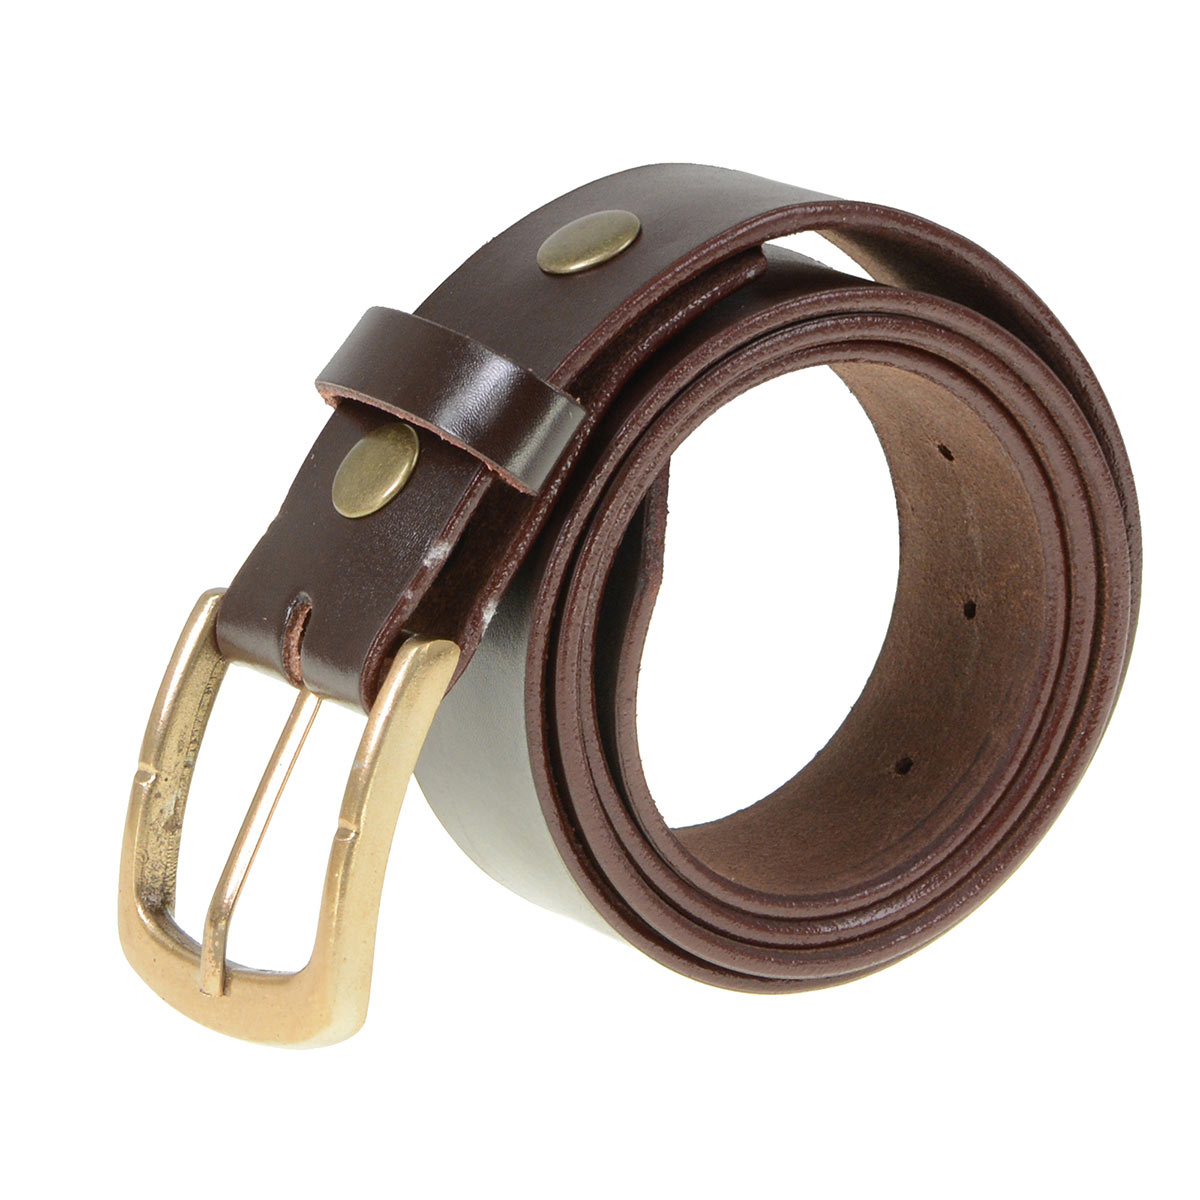 Milwaukee Leather MP7115 Men's Light Brown Genuine Leather Belt with Interchangeable Buckle - 1.5 inches Wide